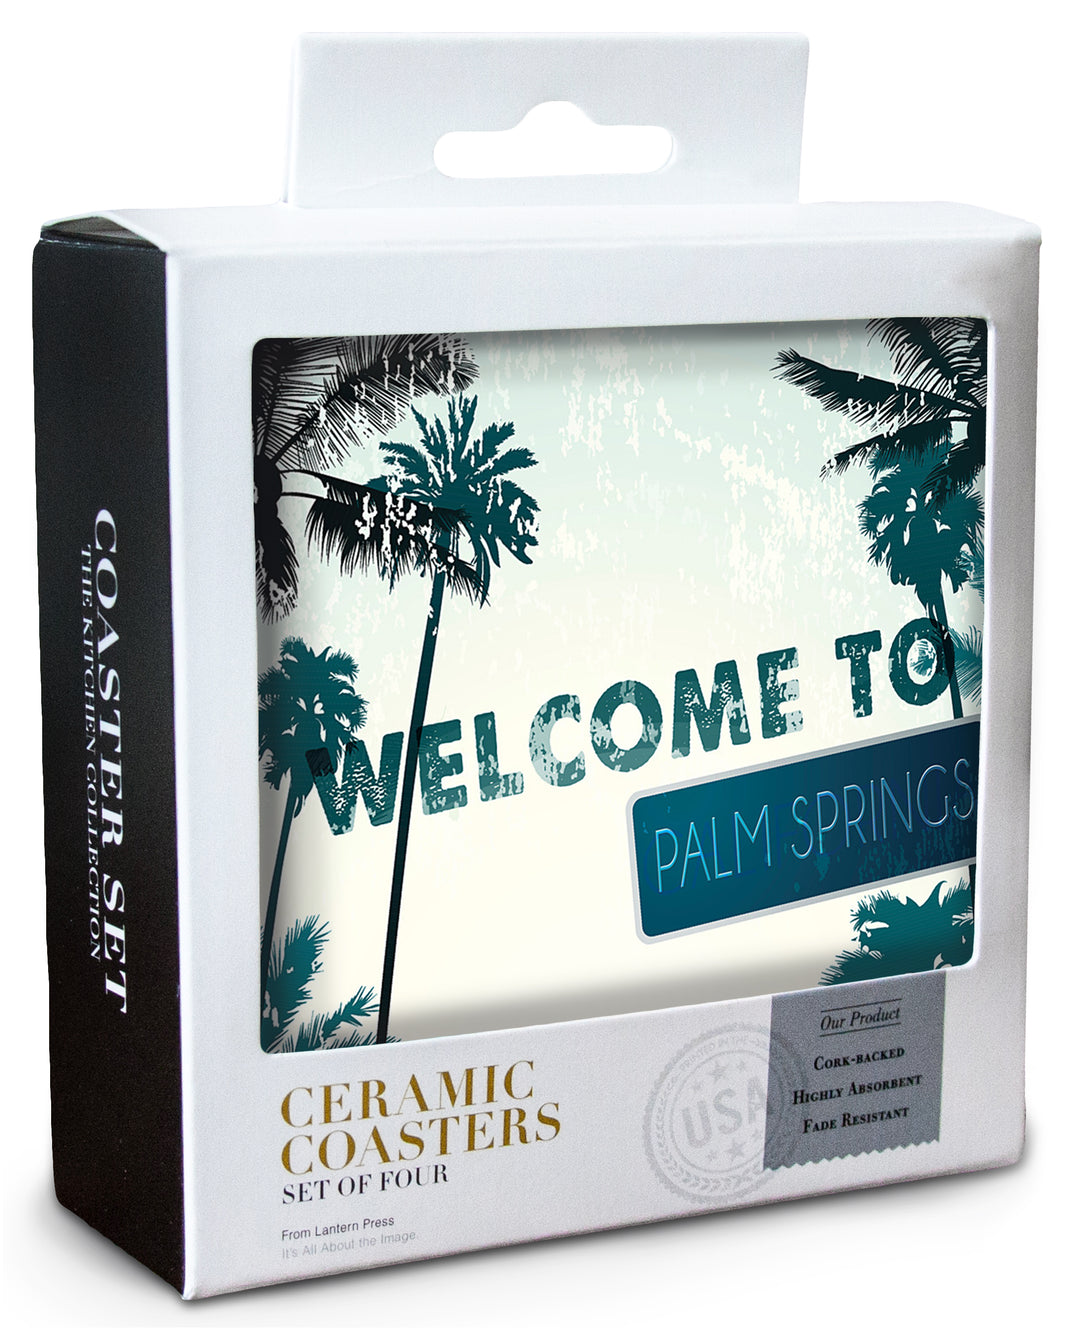 Palm Springs, California, Street Sign and Palms, Coaster Set